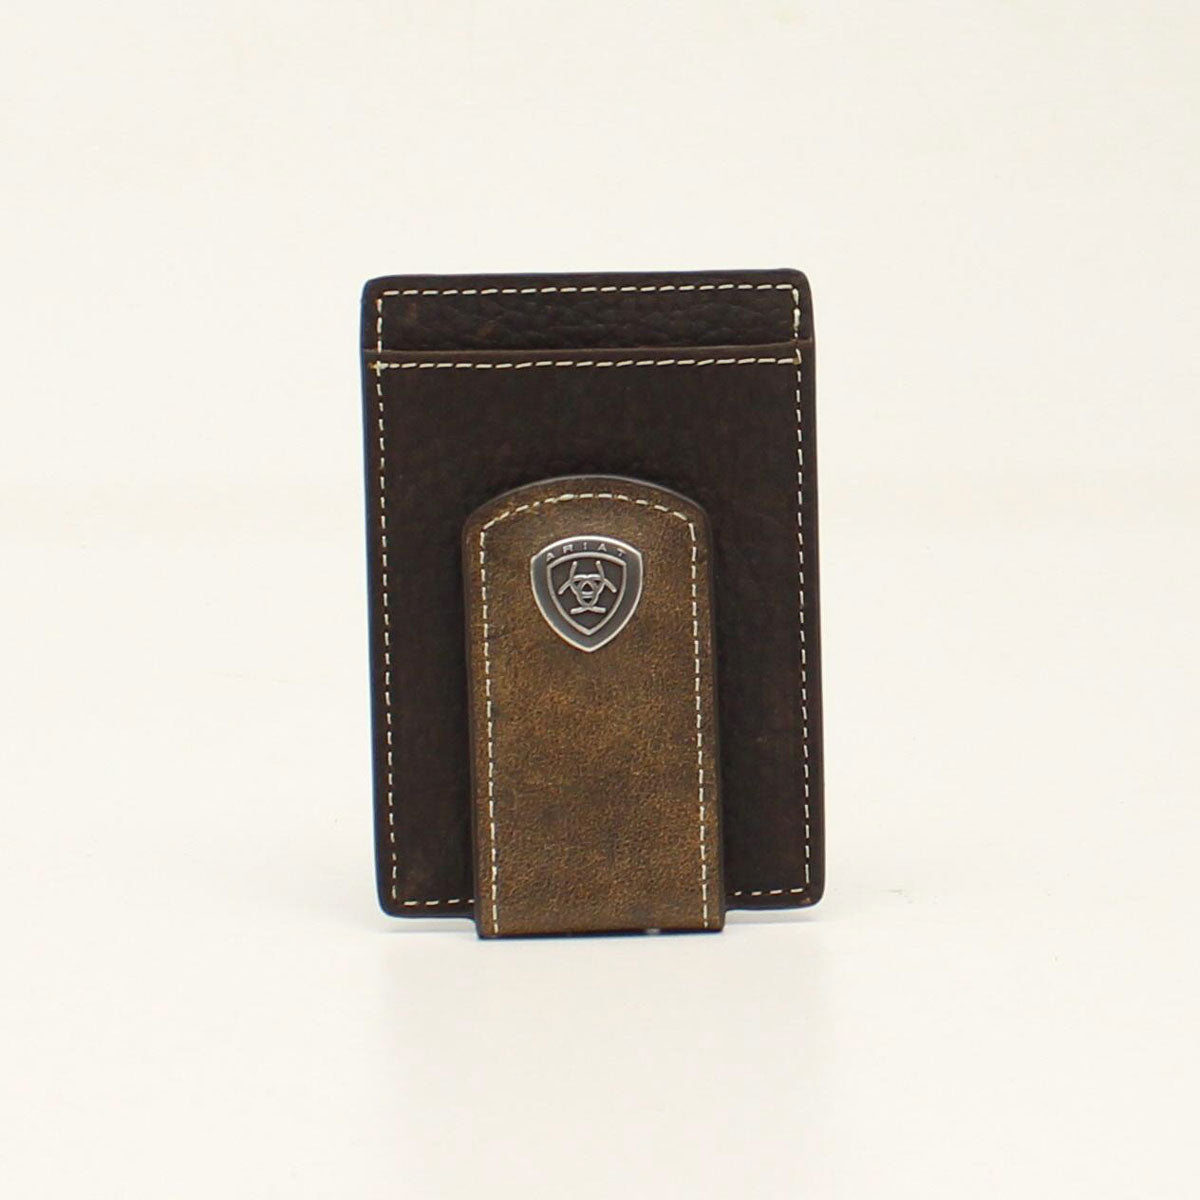 Ariat Concho Magentic Money Clip Brown Leather Wallet